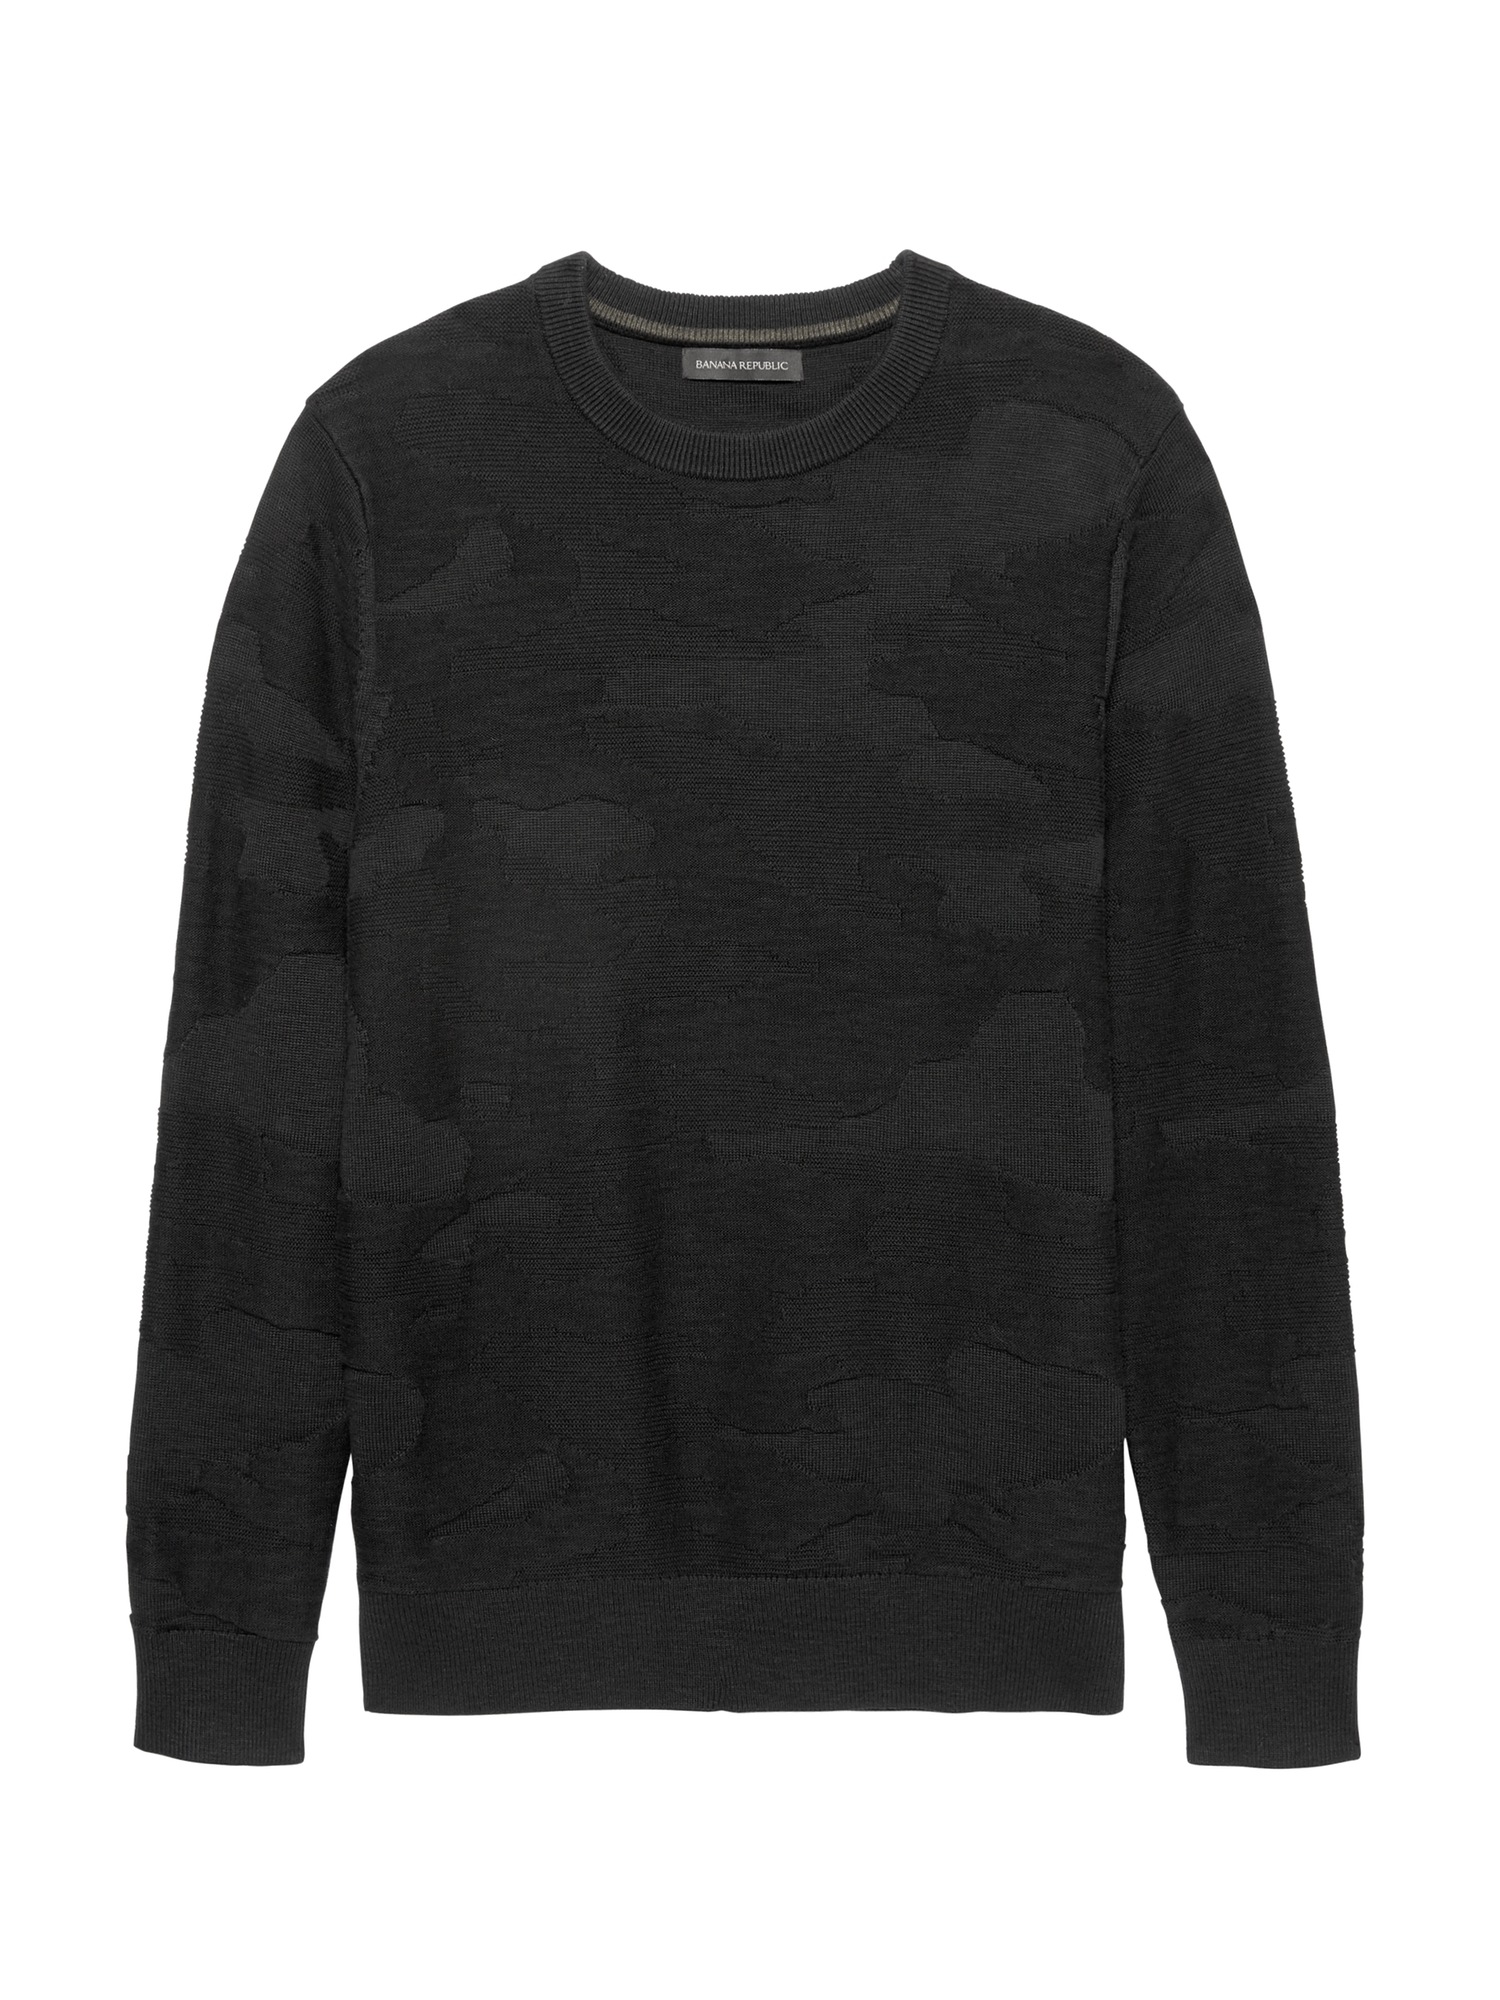 JAPAN EXCLUSIVE Cotton Camouflage Crew-Neck Sweater